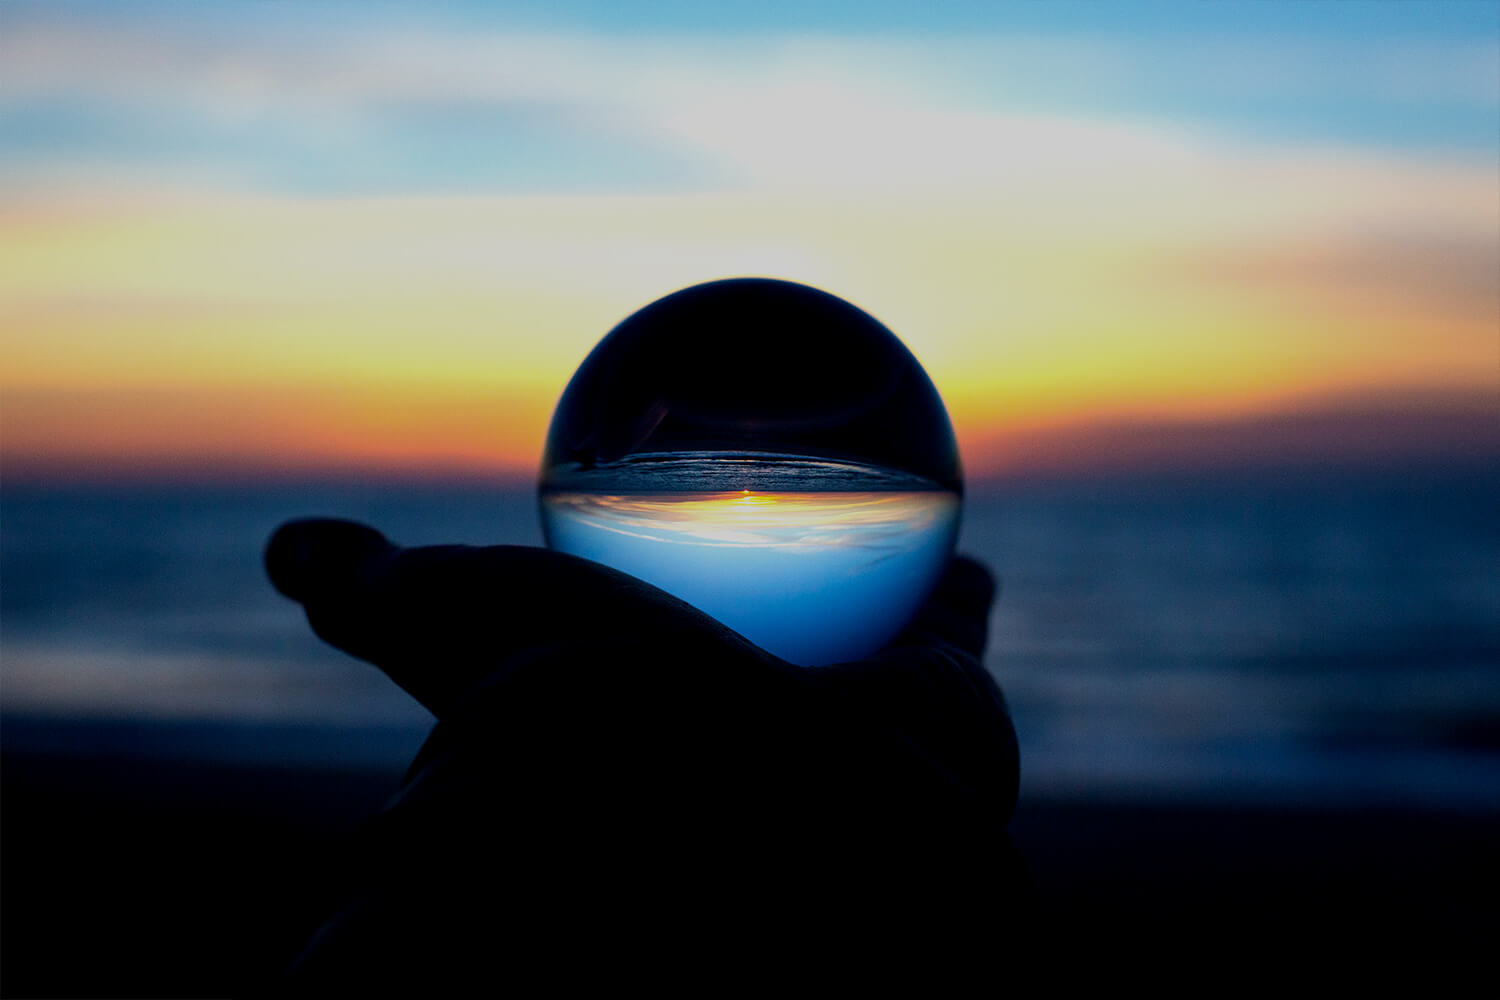 Person holding a glass ball in front of a sunset2